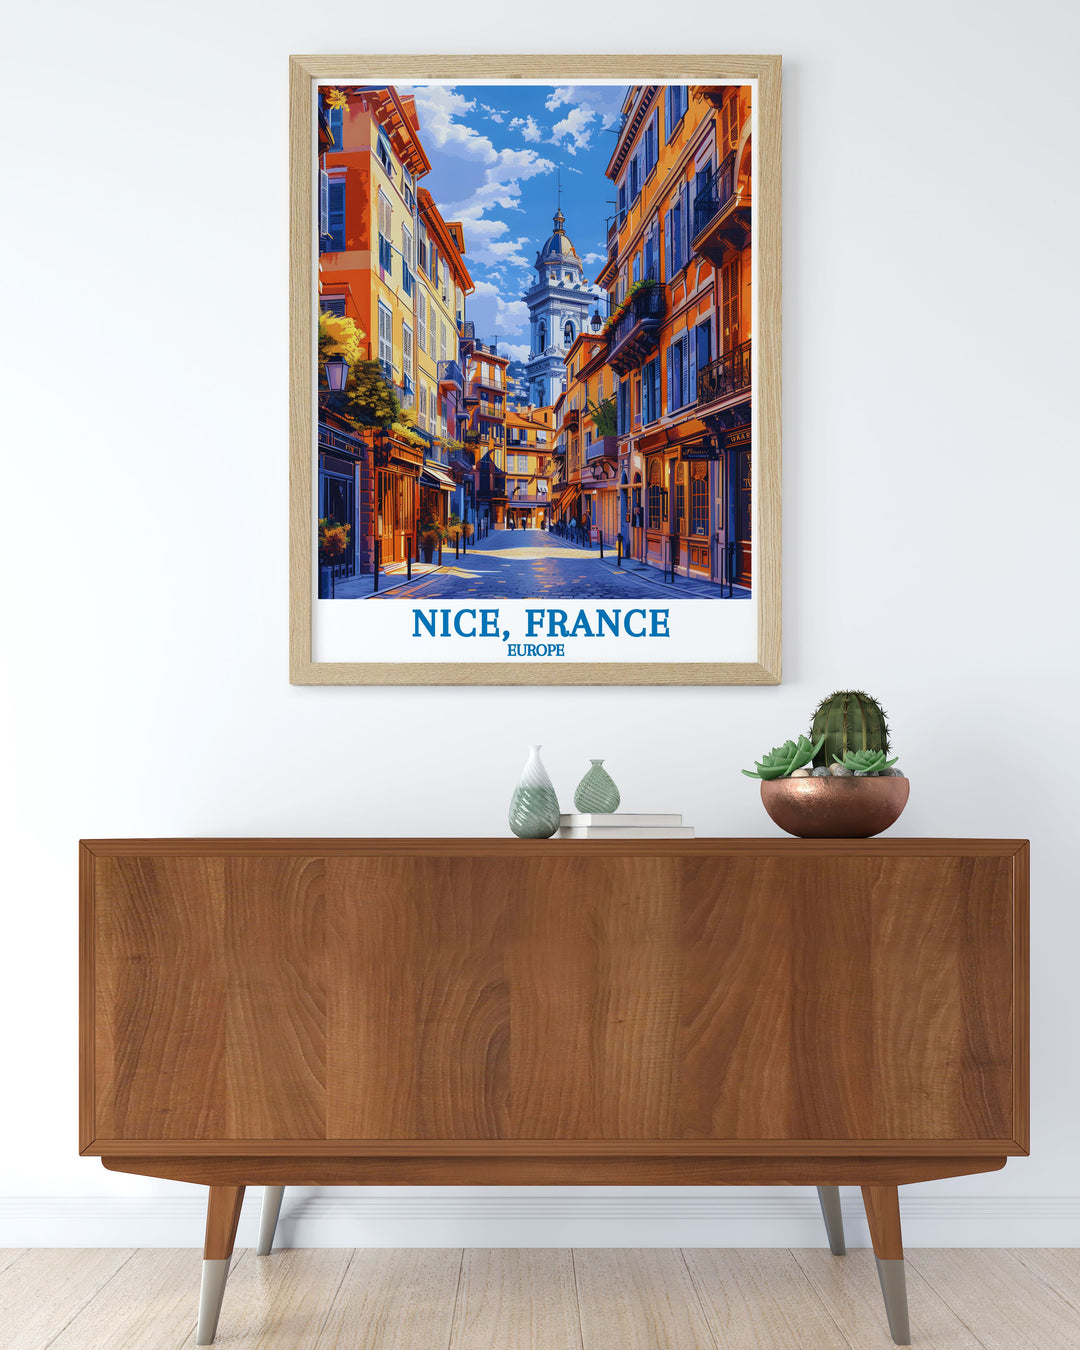 Bring the essence of Old Town Vieux Nice into your home with this exquisite travel poster, highlighting the rich history and cultural heritage of this charming French neighborhood.